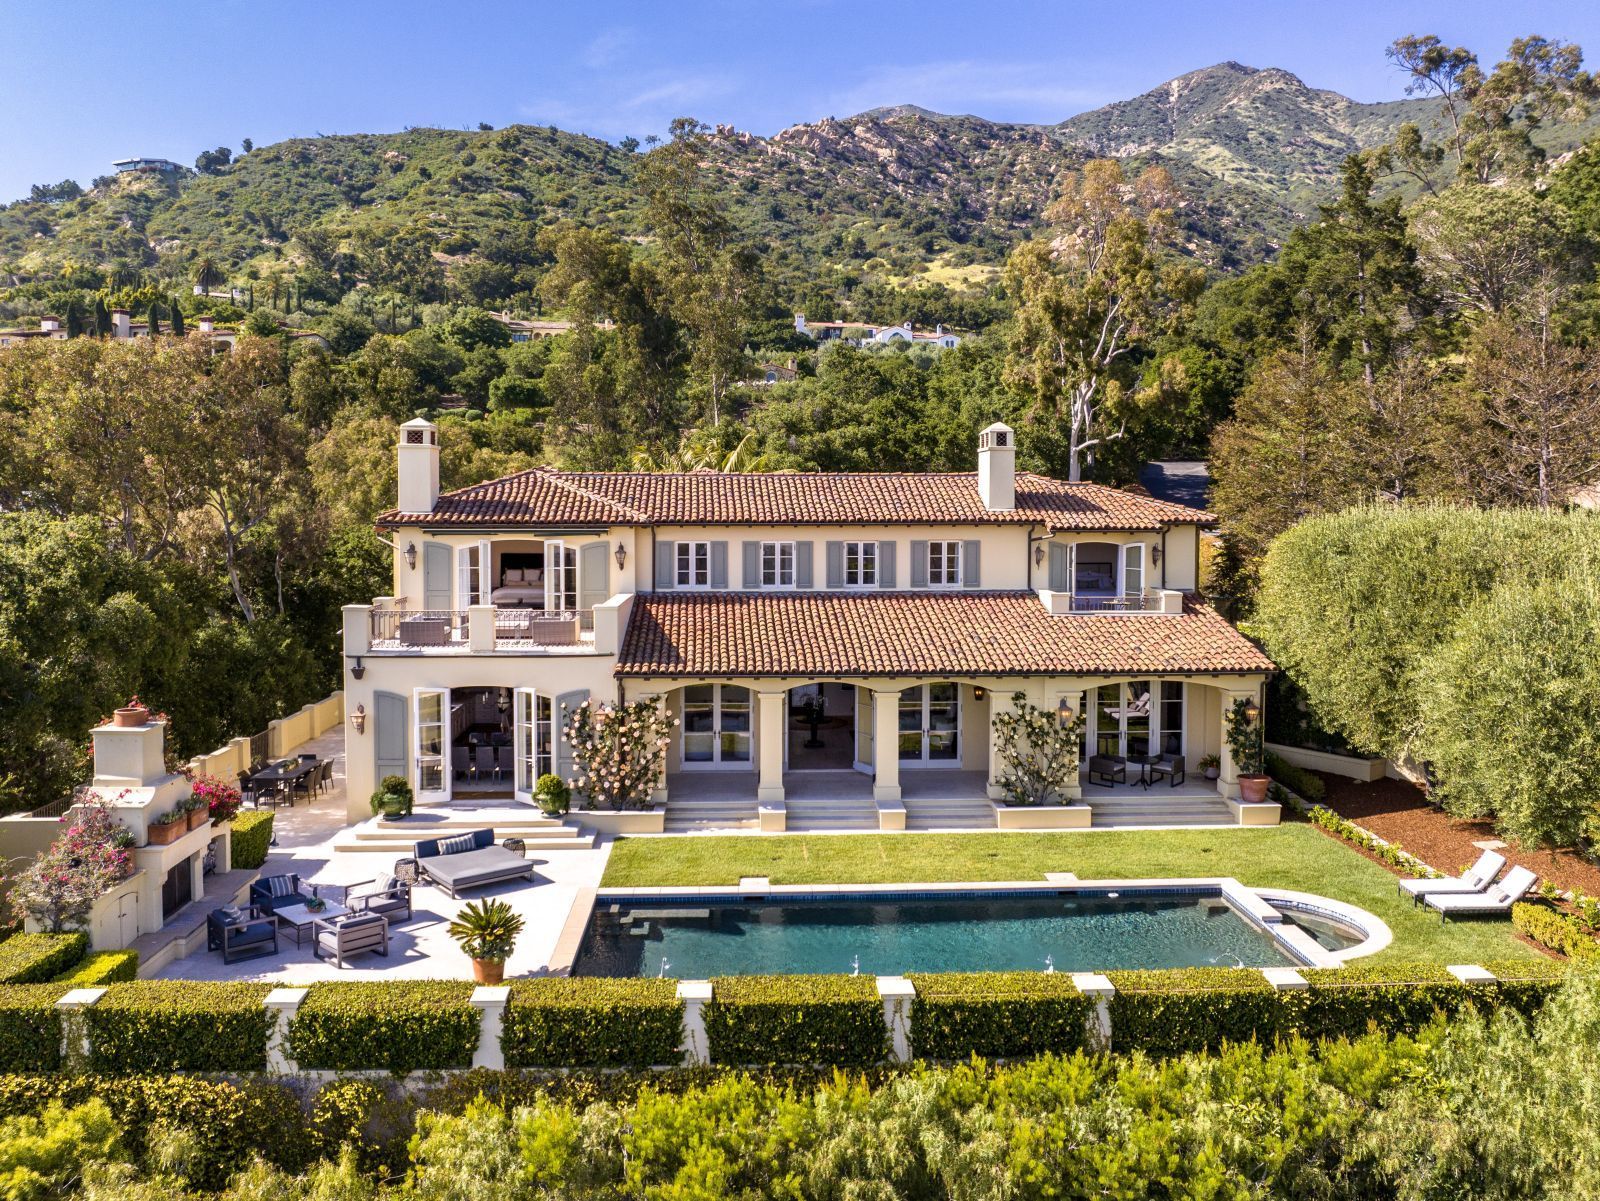 Classic Mediterranean Estate with a red tiled roof